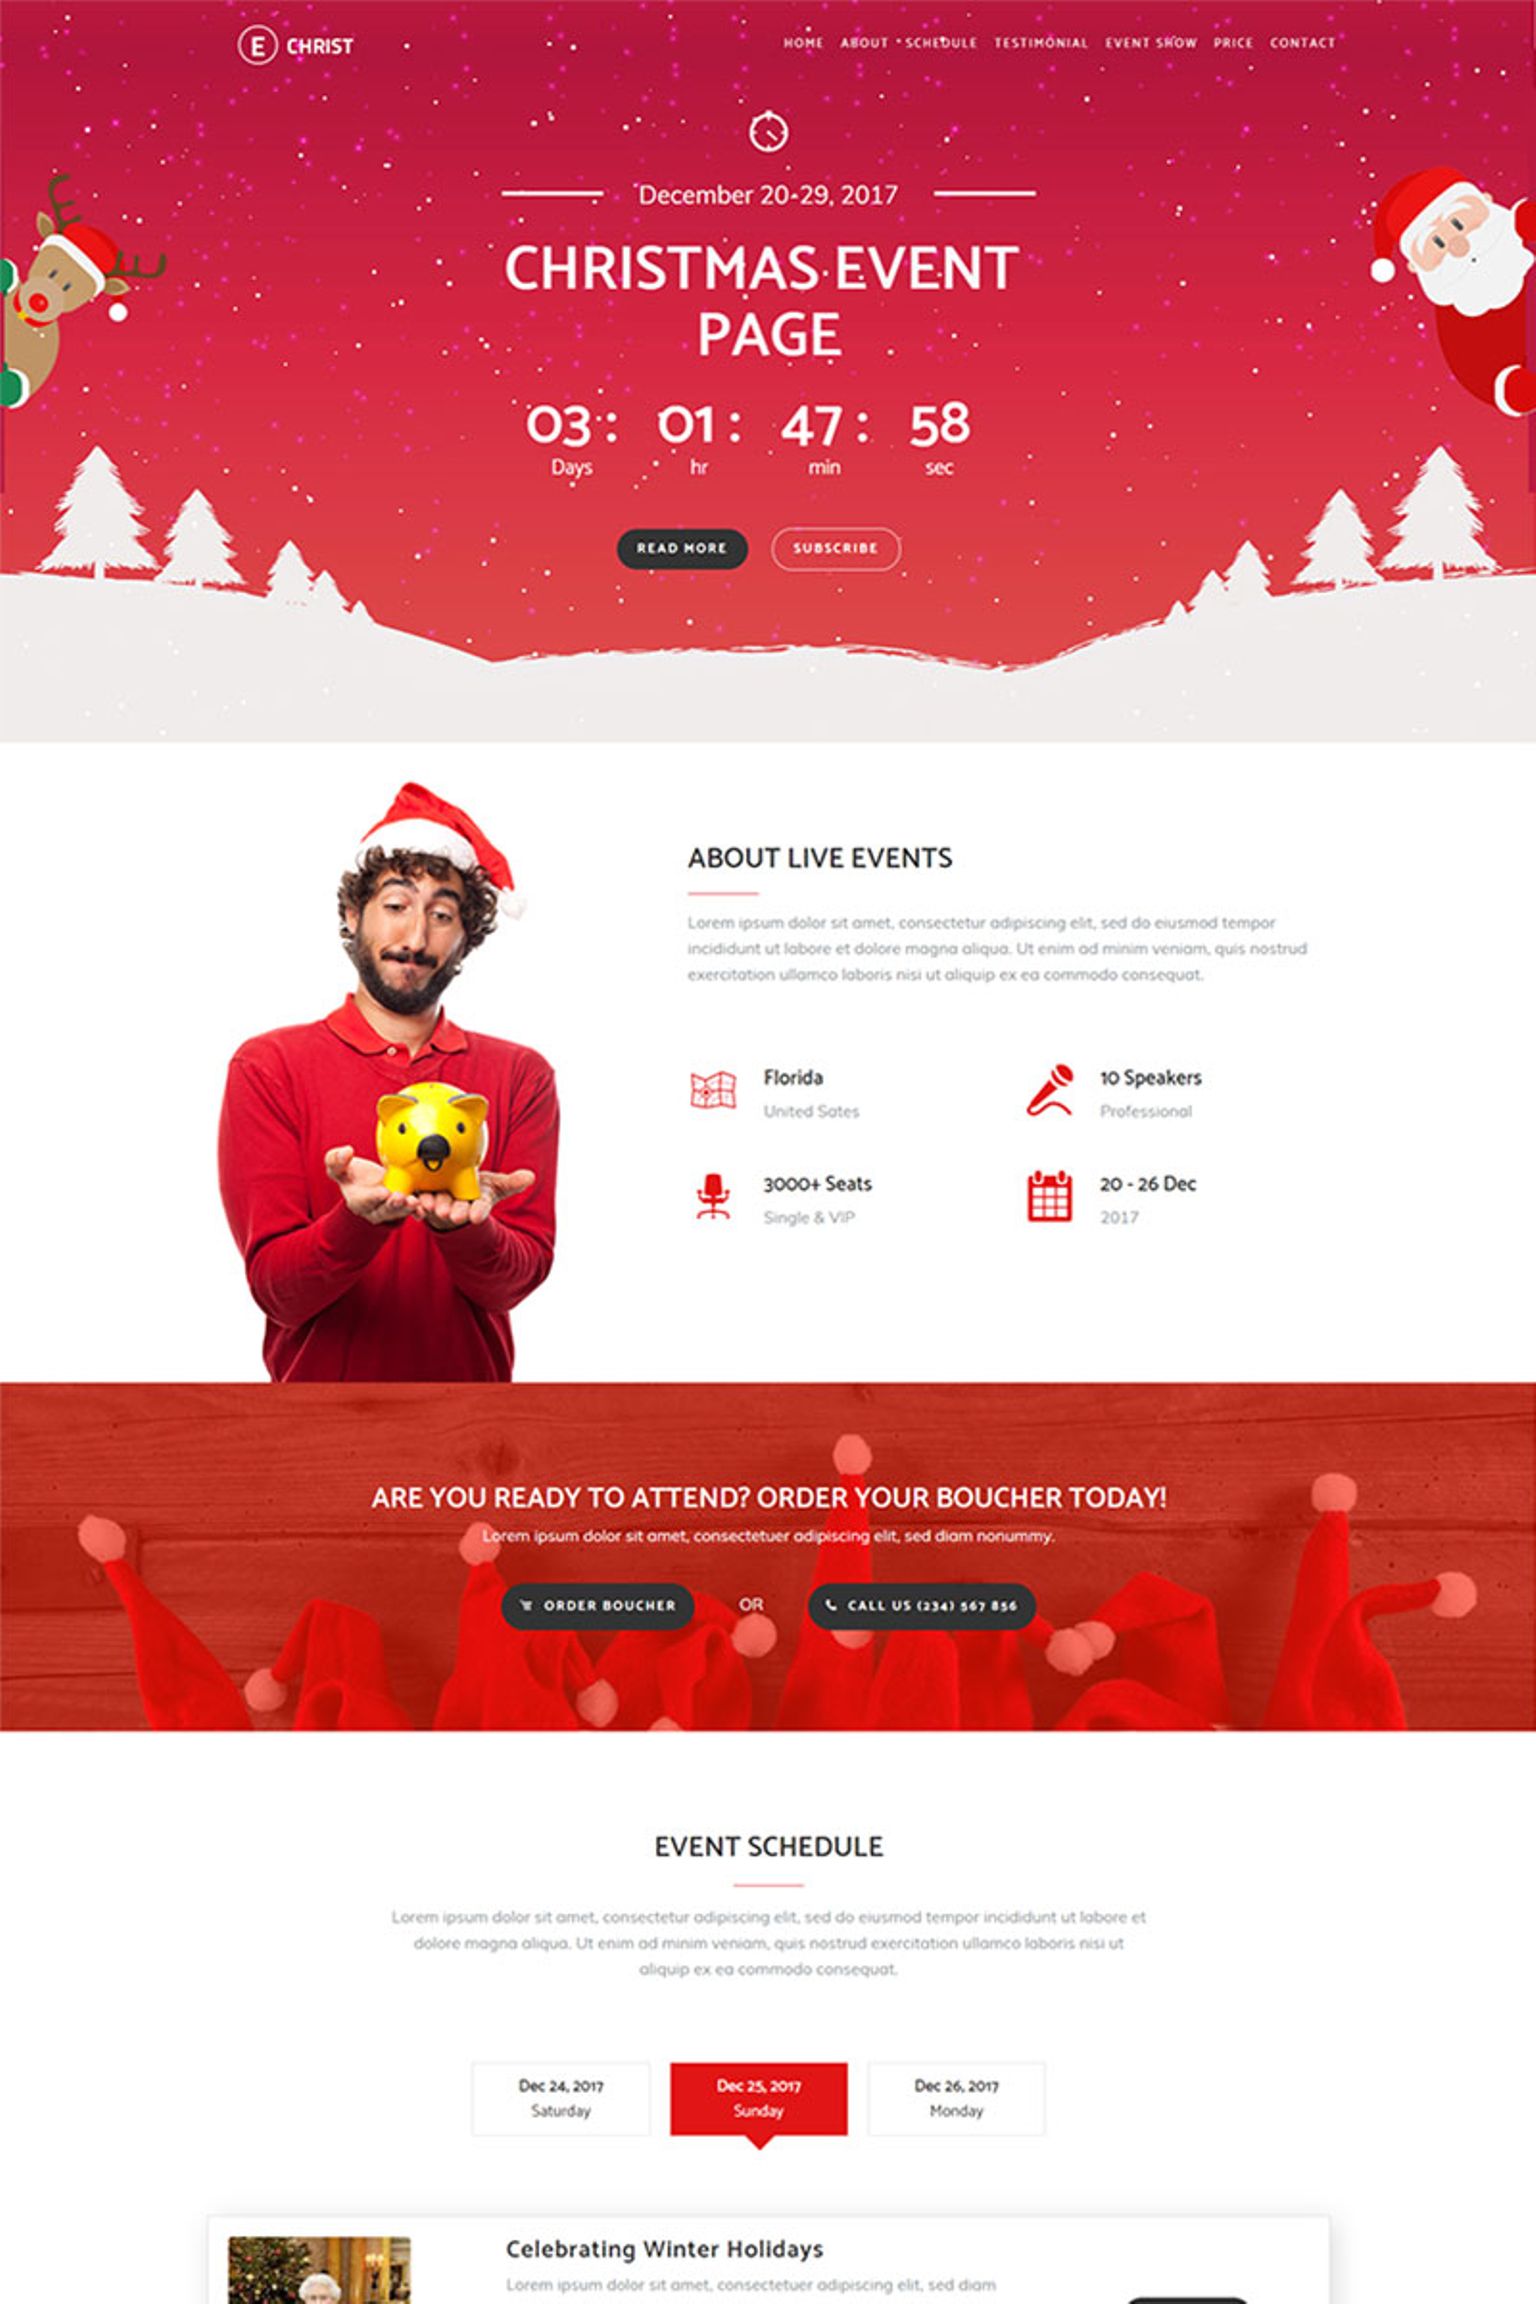 Echrist - Christmas Event Landing Page Template